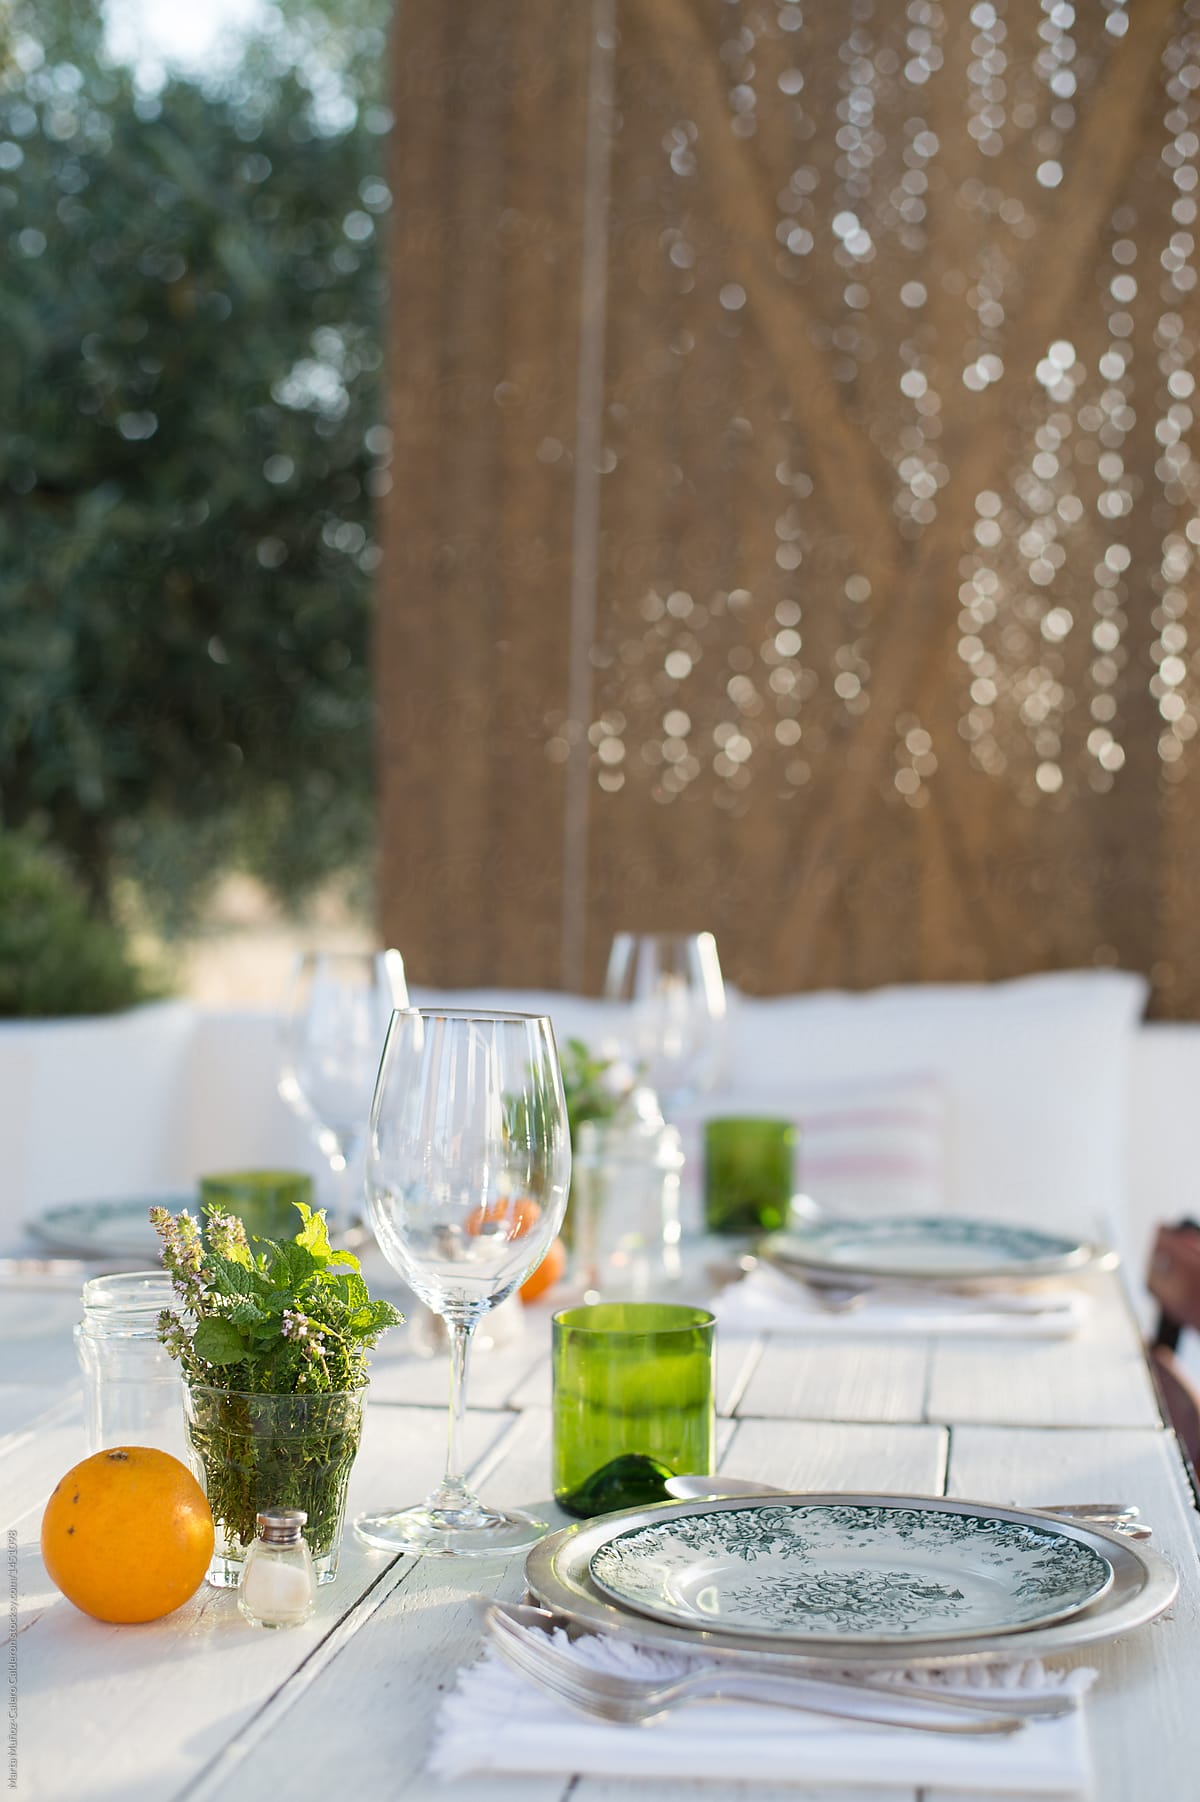 Typical mediterranean table in a patio